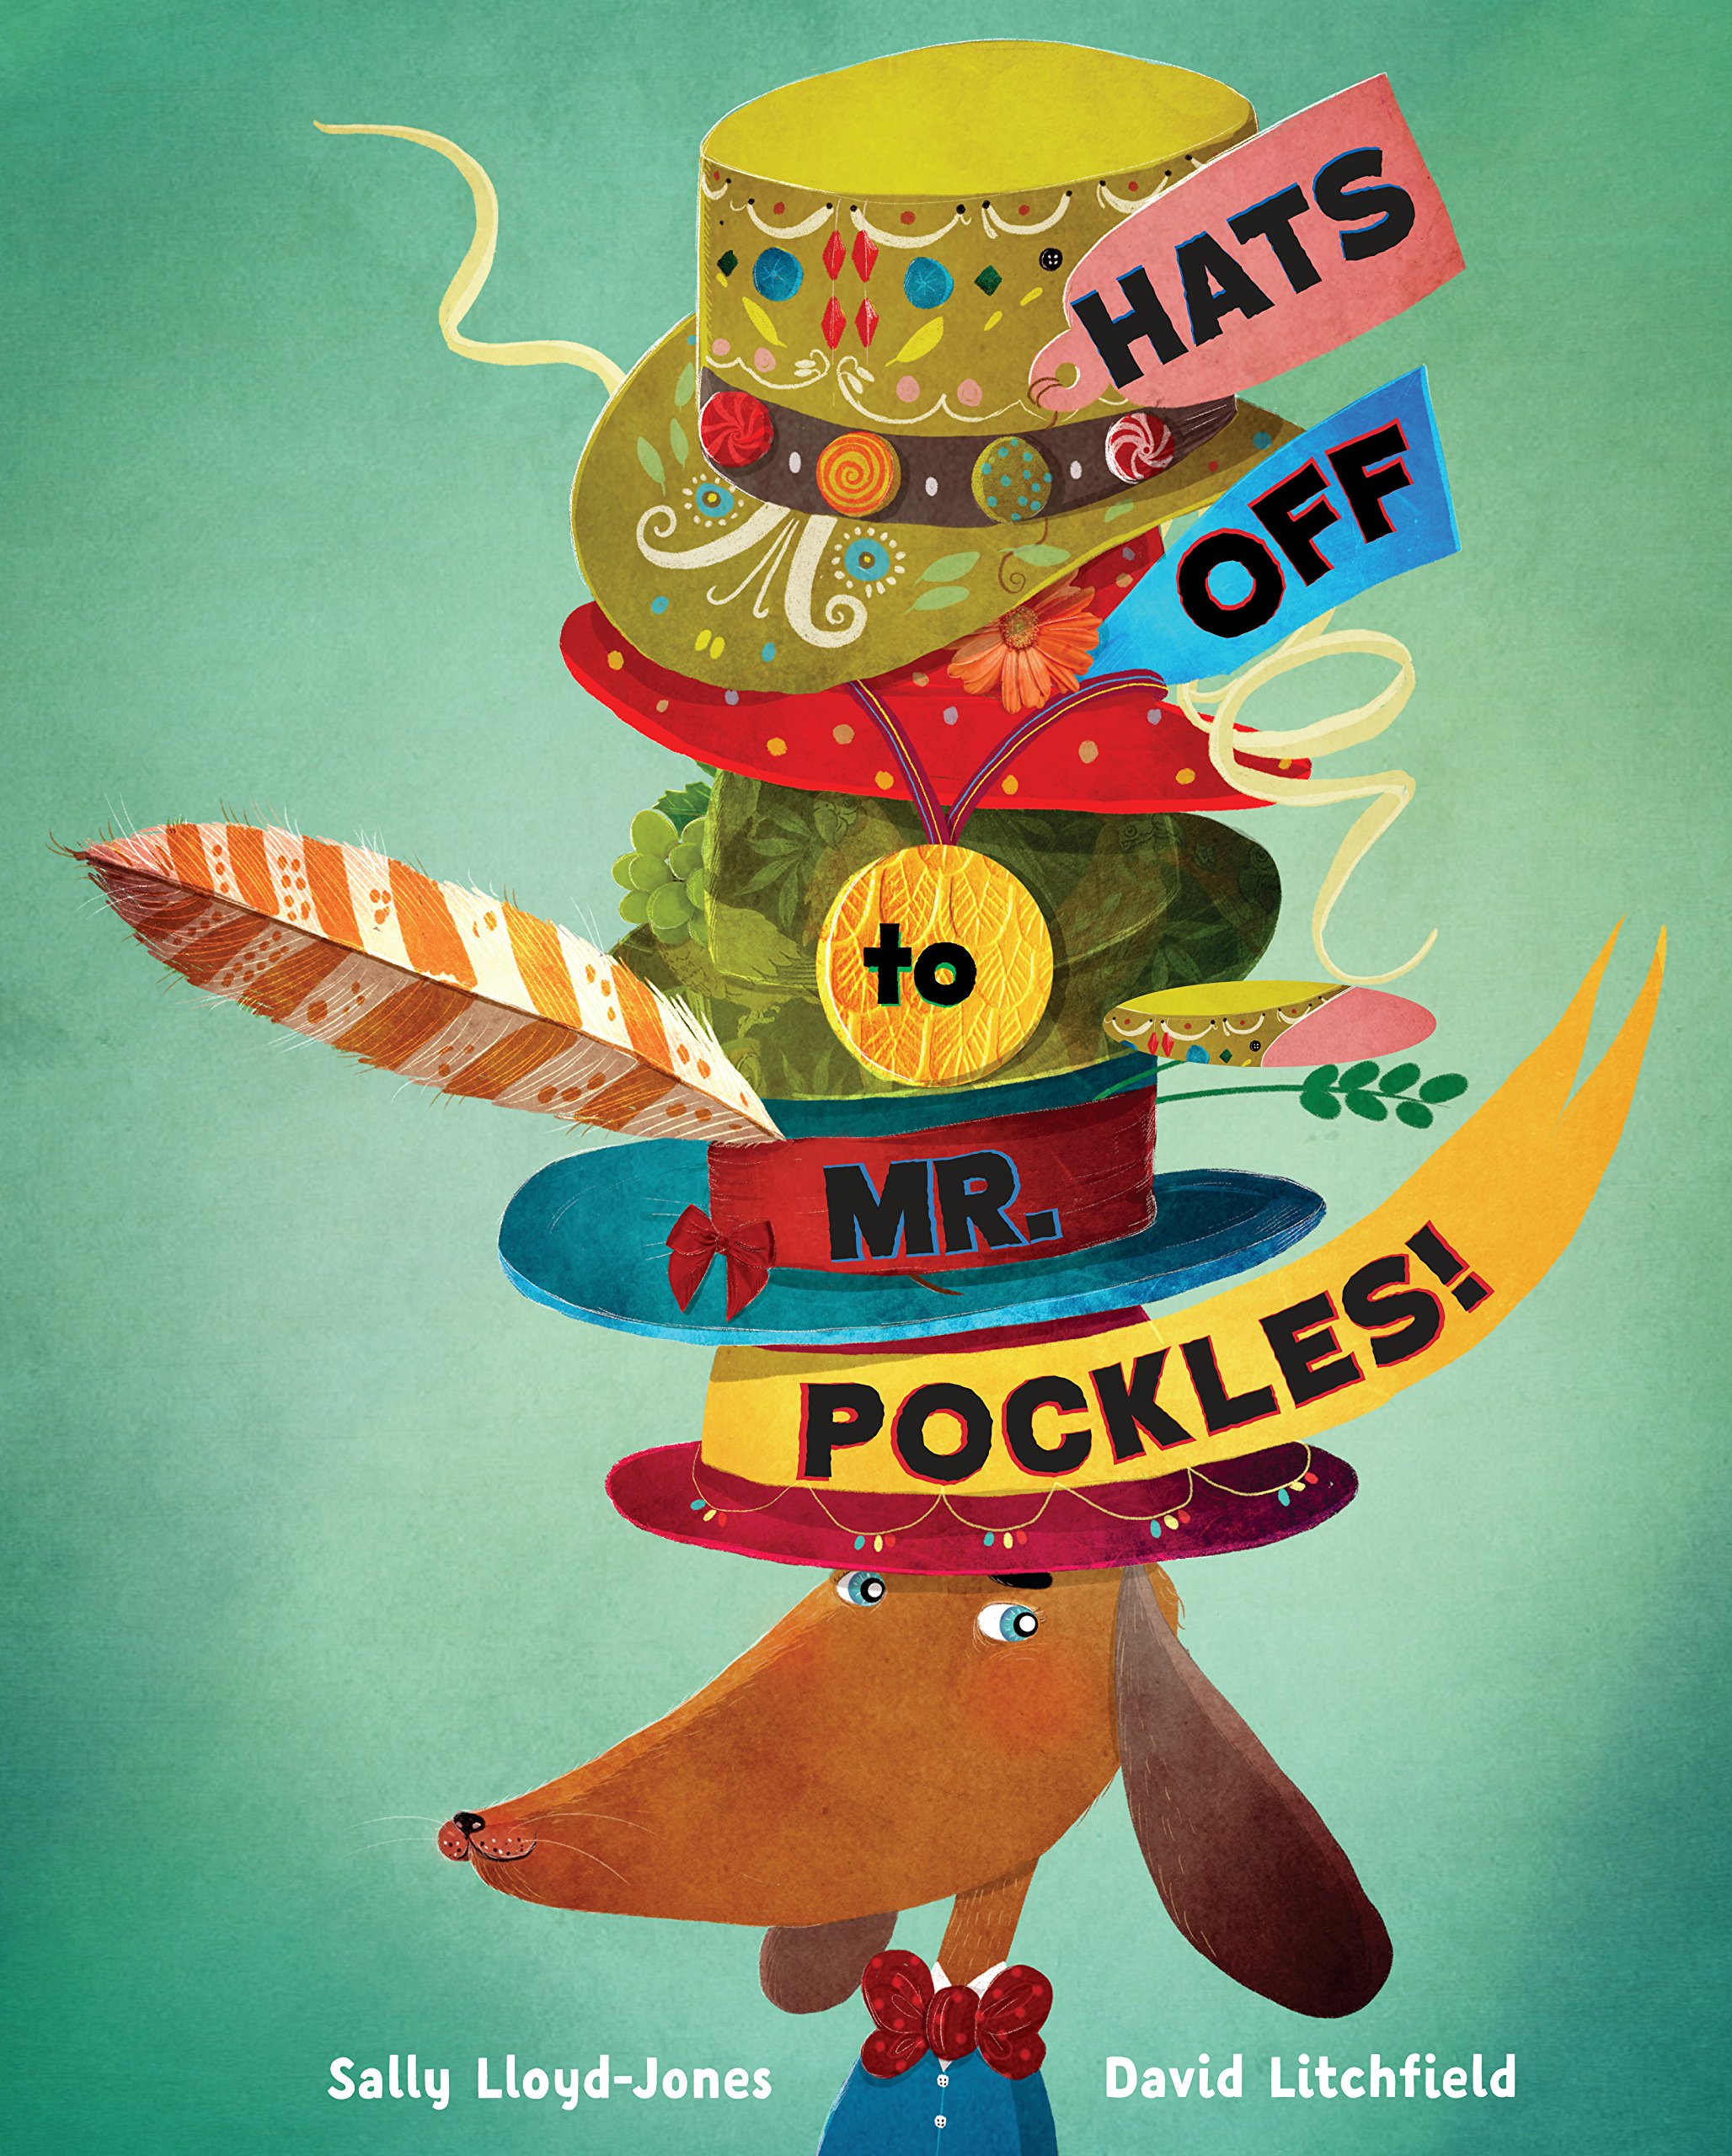 Hats Off to Mr Pockles